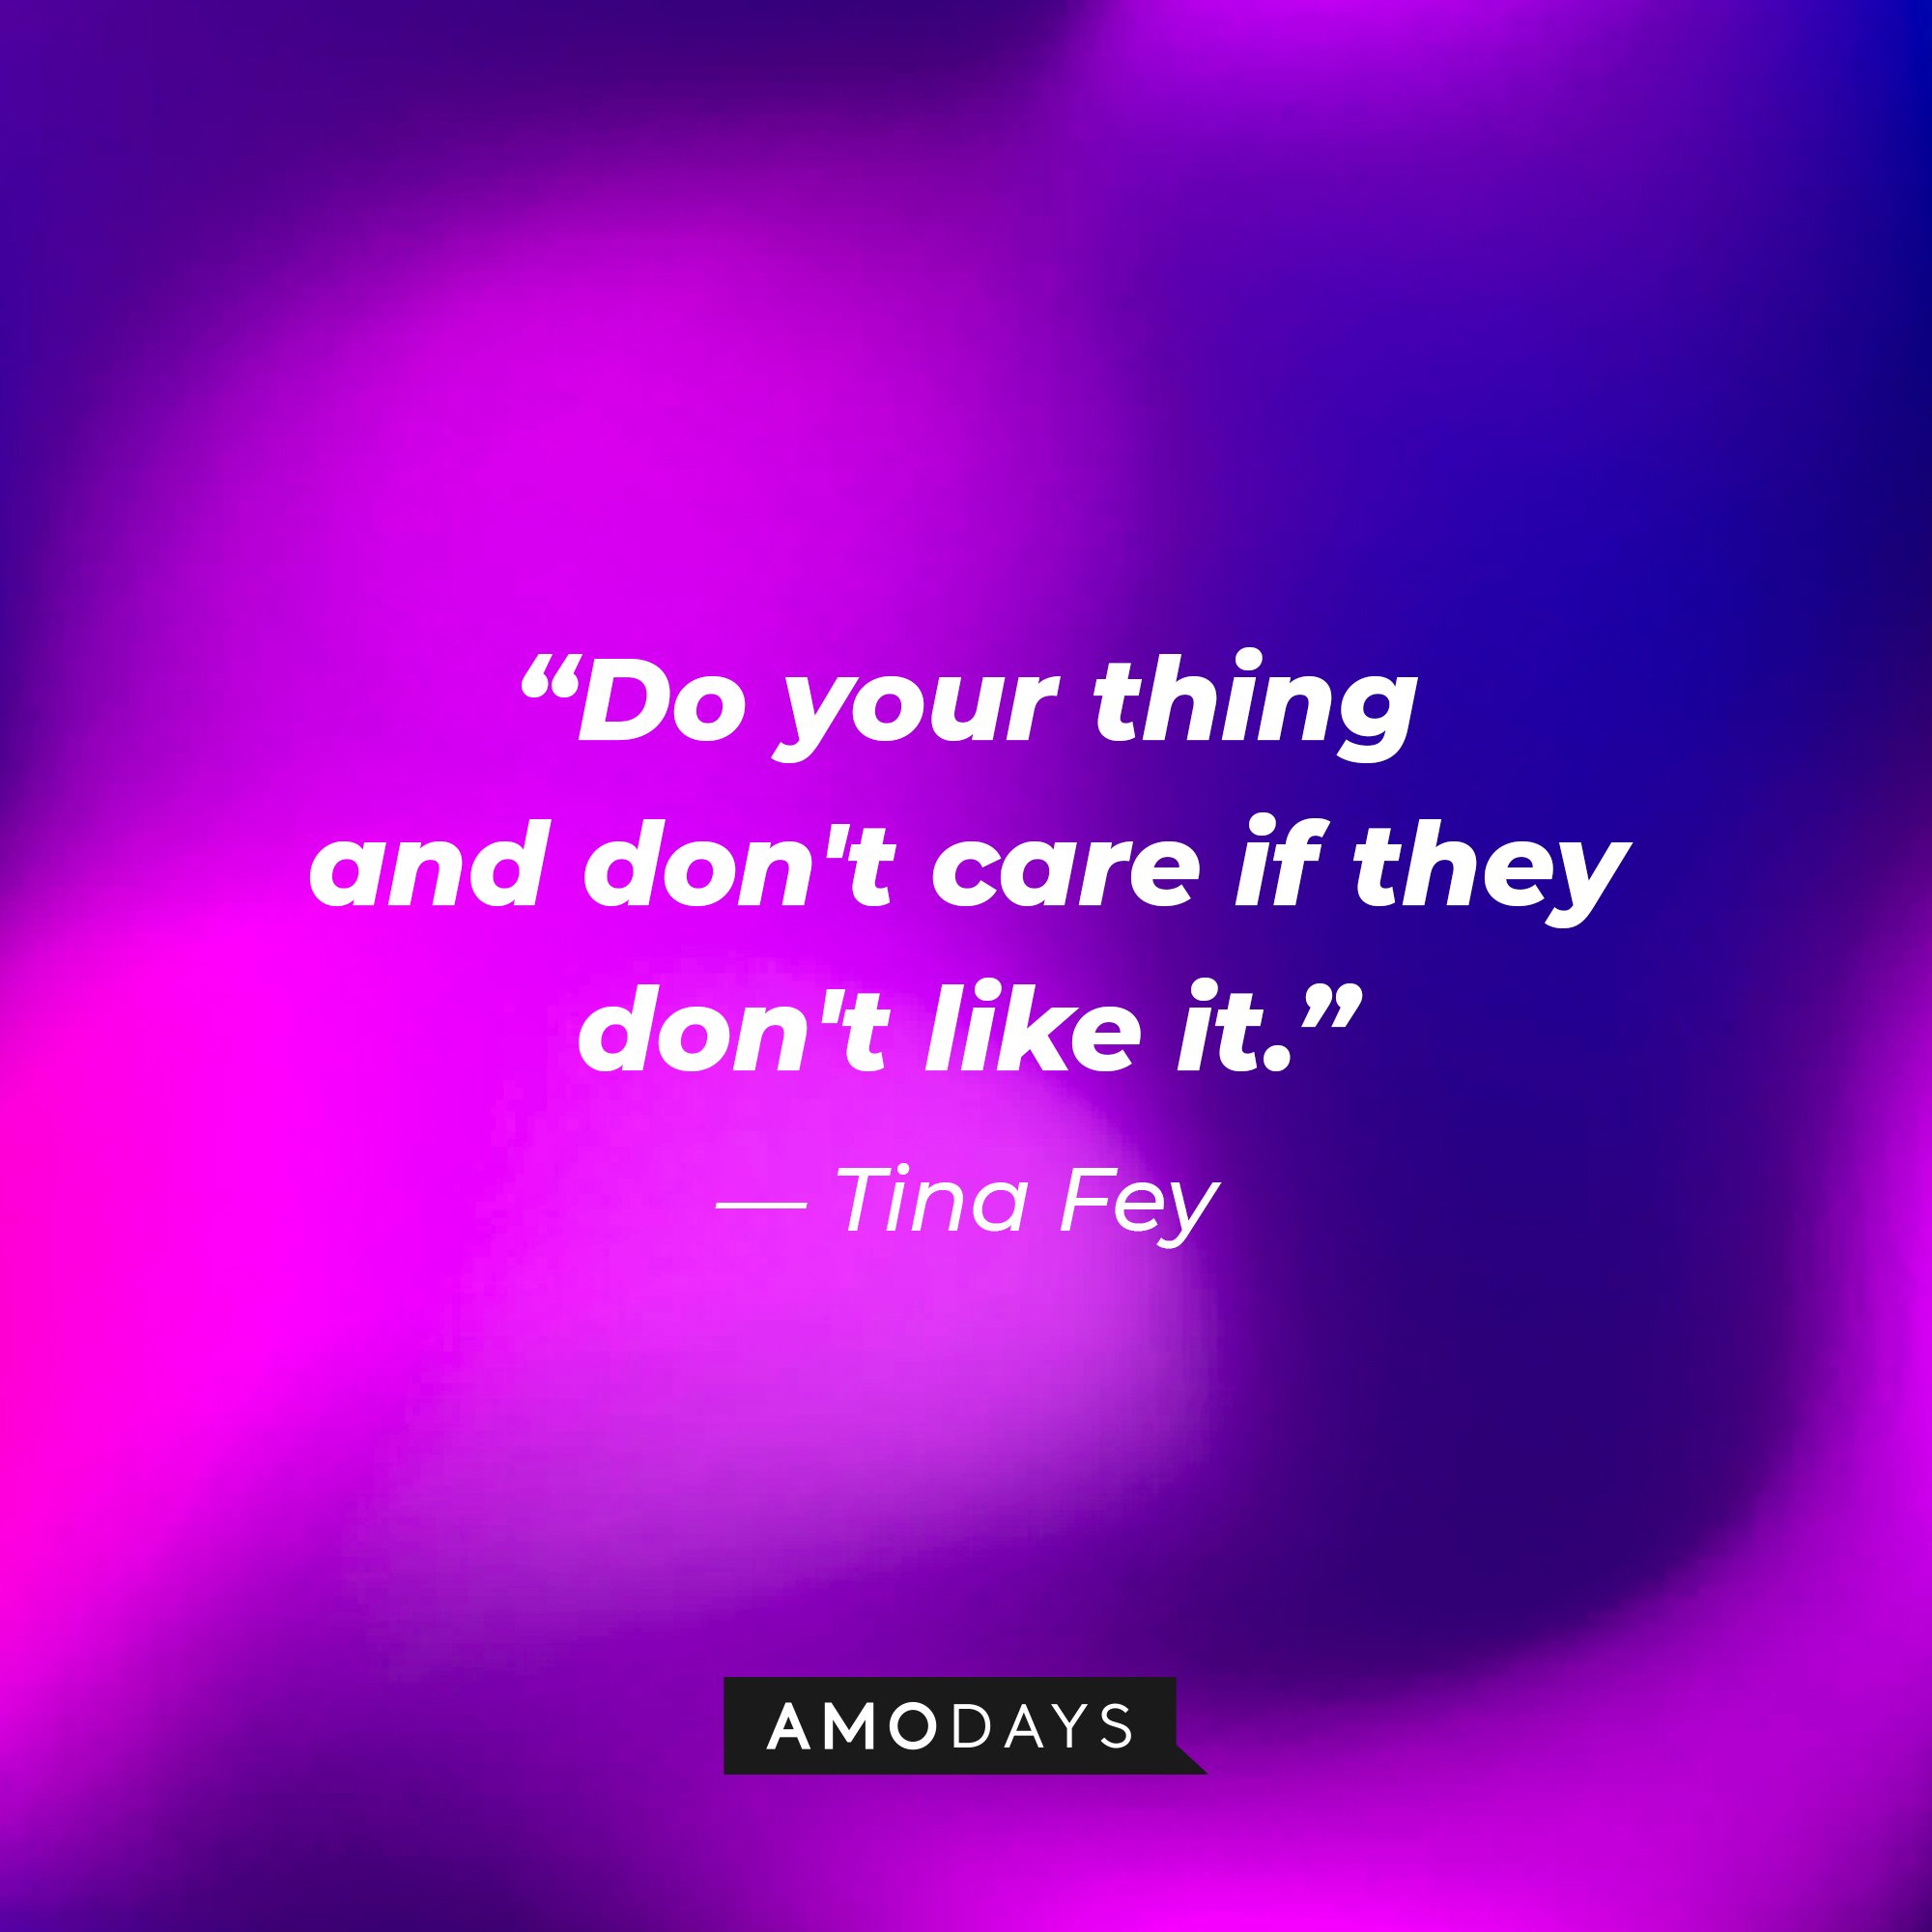 Tina Fey’s quote: "Do your thing and don't care if they don't like it." | Image: AmoDays